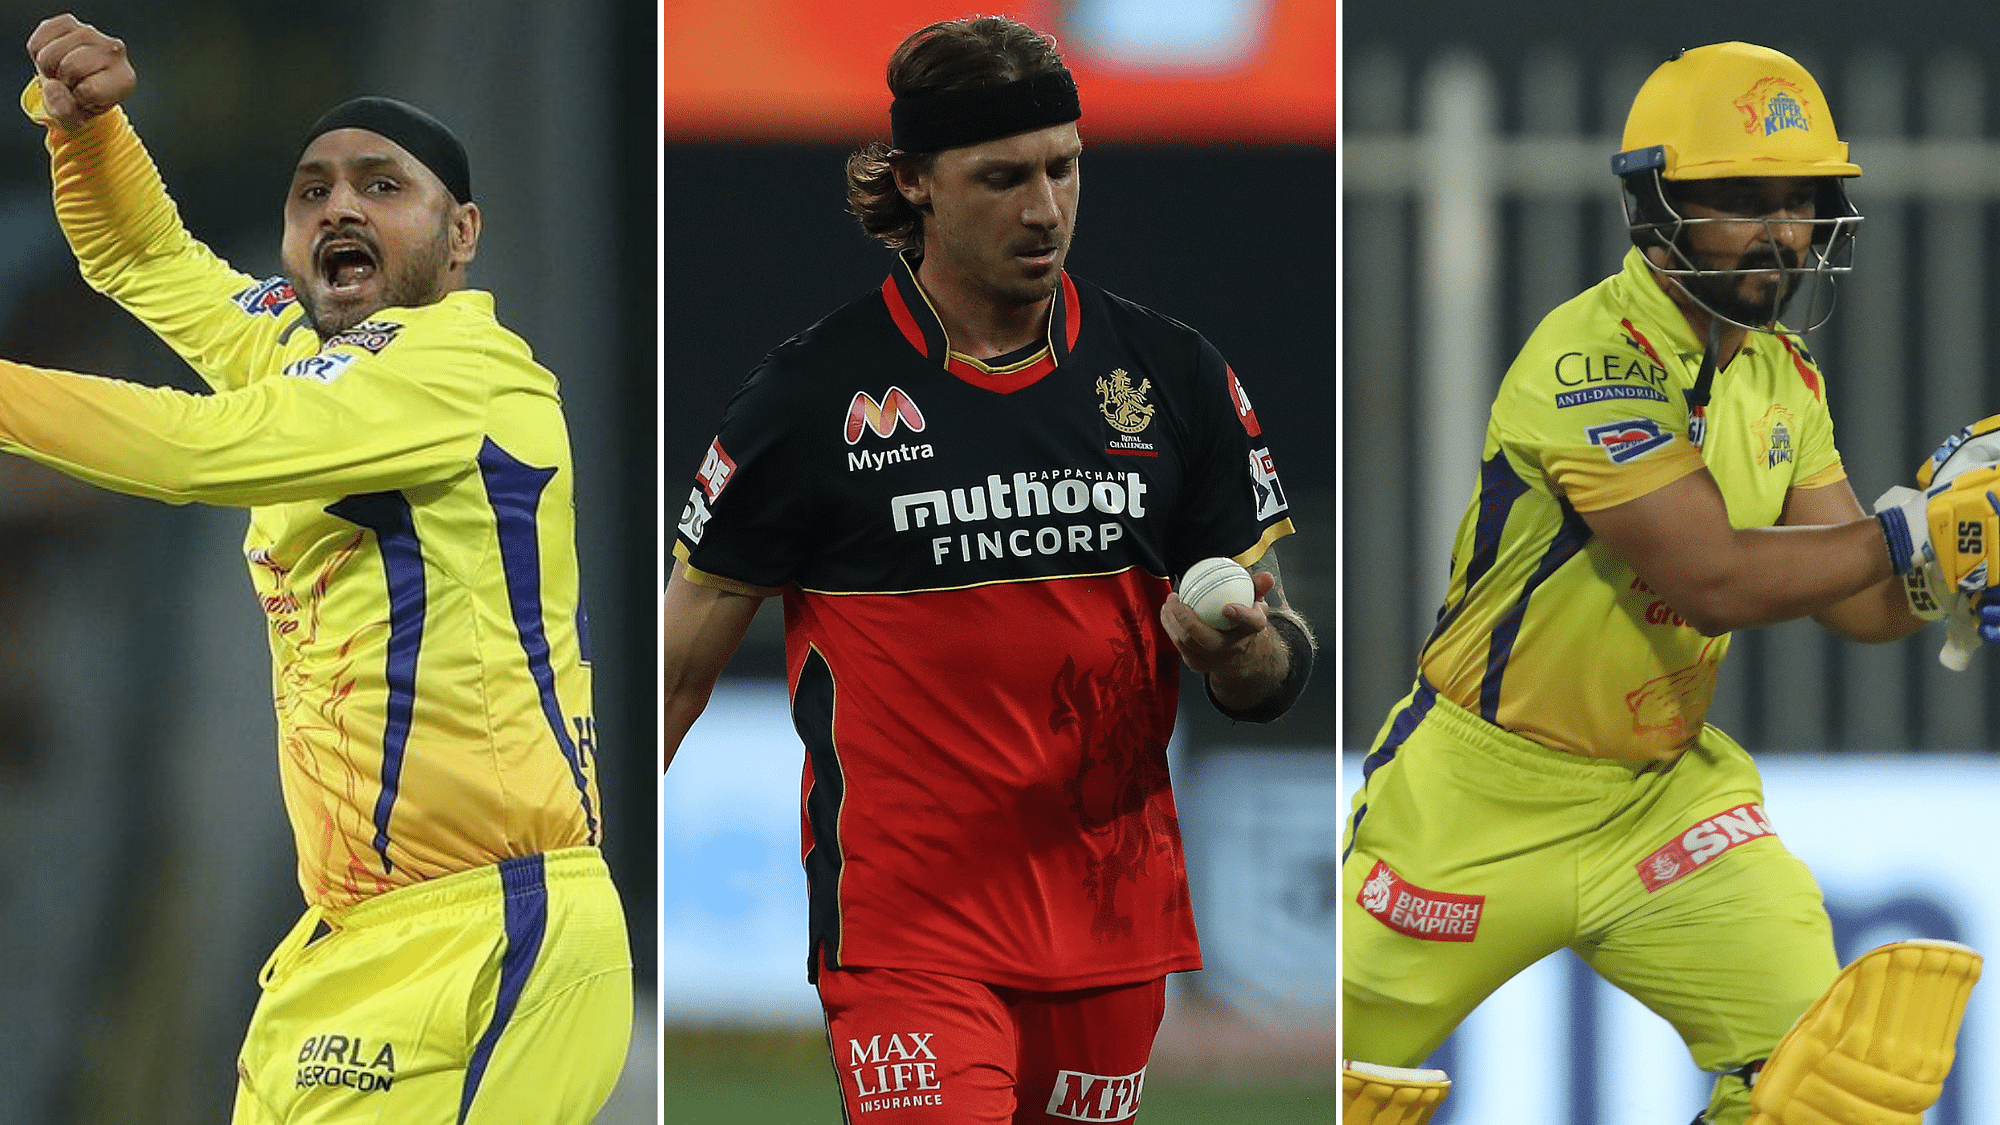 From Harbhajan Singh to Dale Steyn, the players who seem unlikely to play in IPL again owing to age and the lack of form.